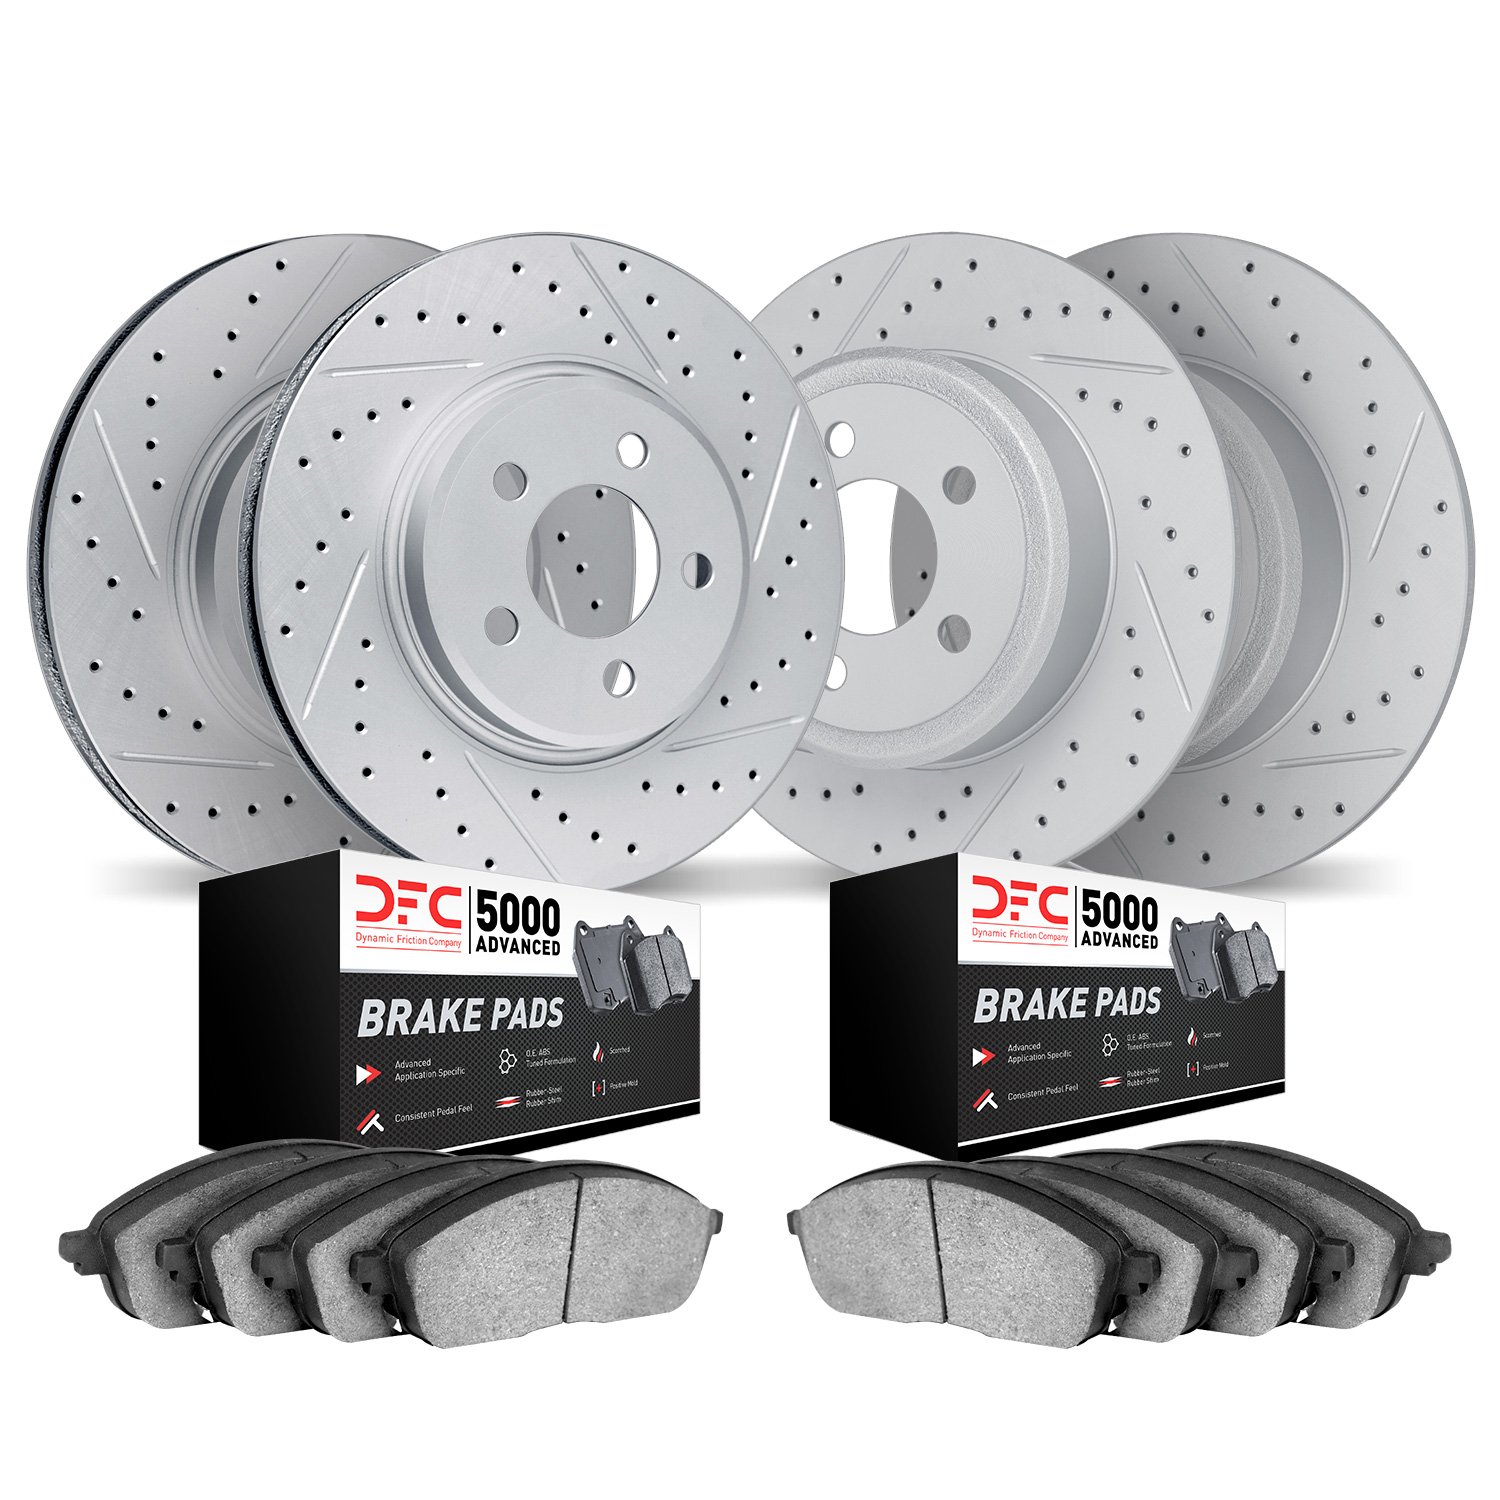 2504-39016 Geoperformance Drilled/Slotted Rotors w/5000 Advanced Brake Pads Kit, 2013-2016 Mopar, Position: Front and Rear